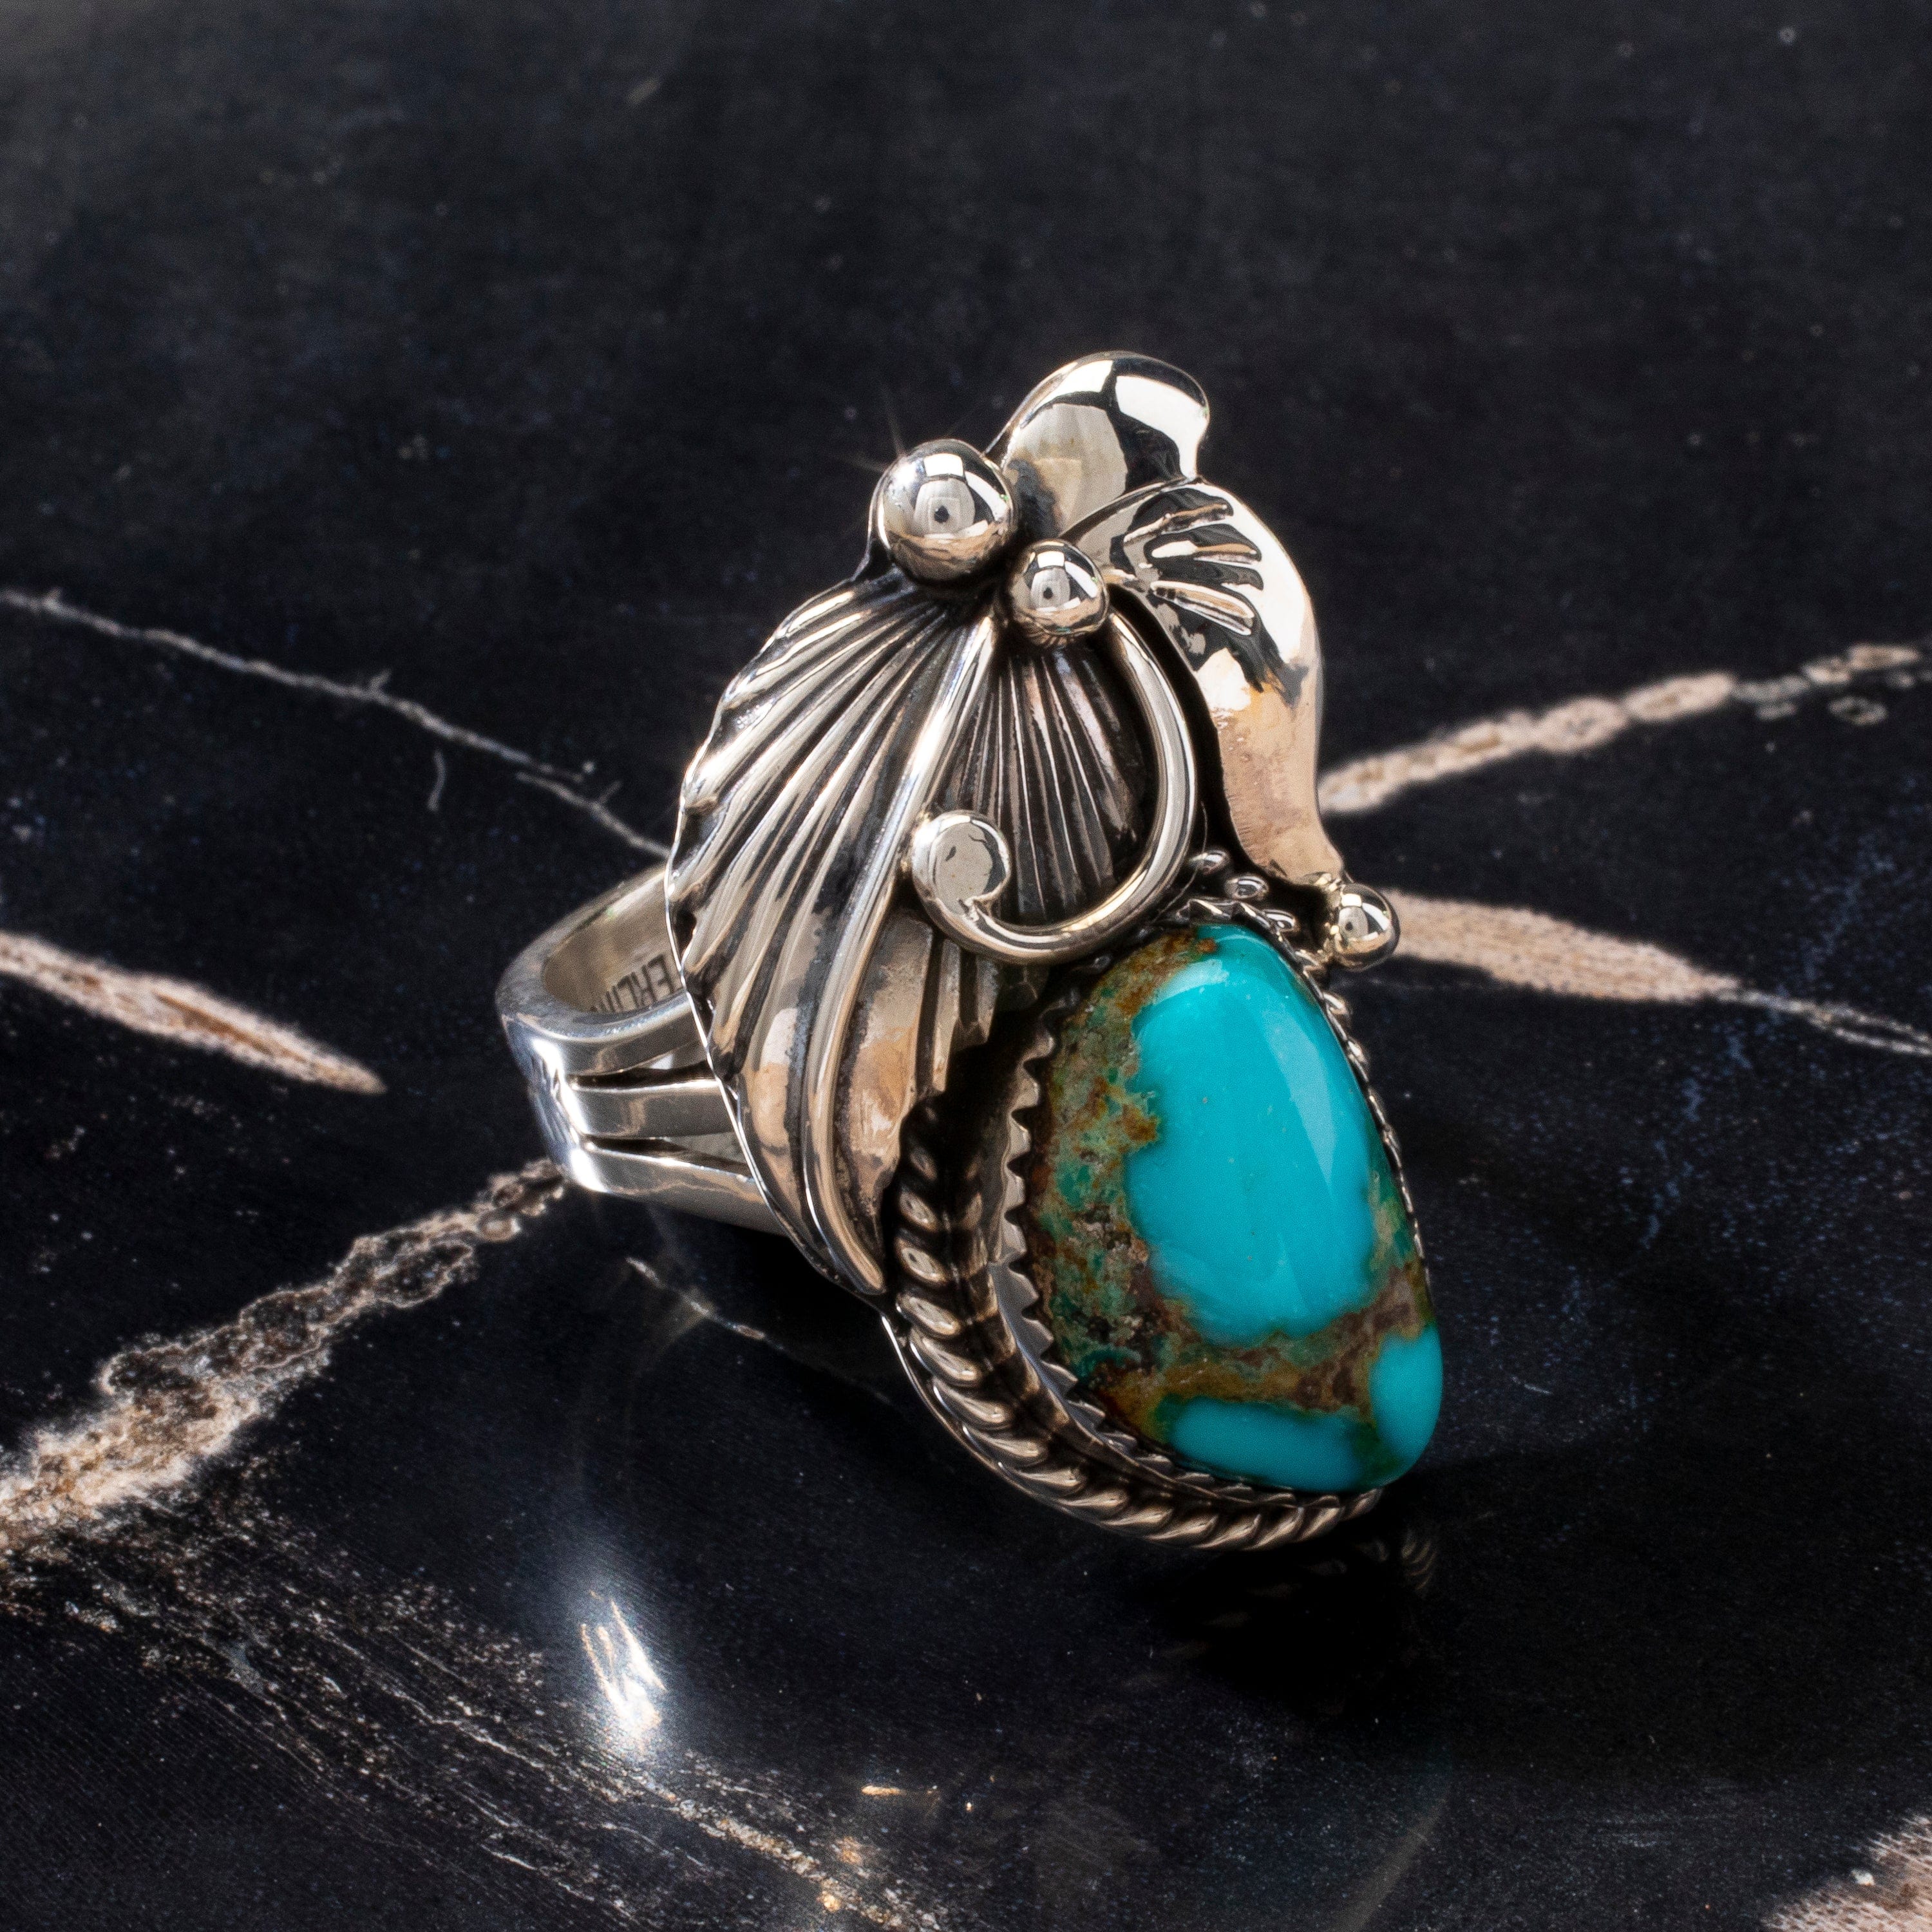 Kalifano Native American Jewelry 8 Joe Piaso Jr. Sleeping Beauty Turquoise Feather Navajo USA Native American Made 925 Sterling Silver Ring NAR600.084.8